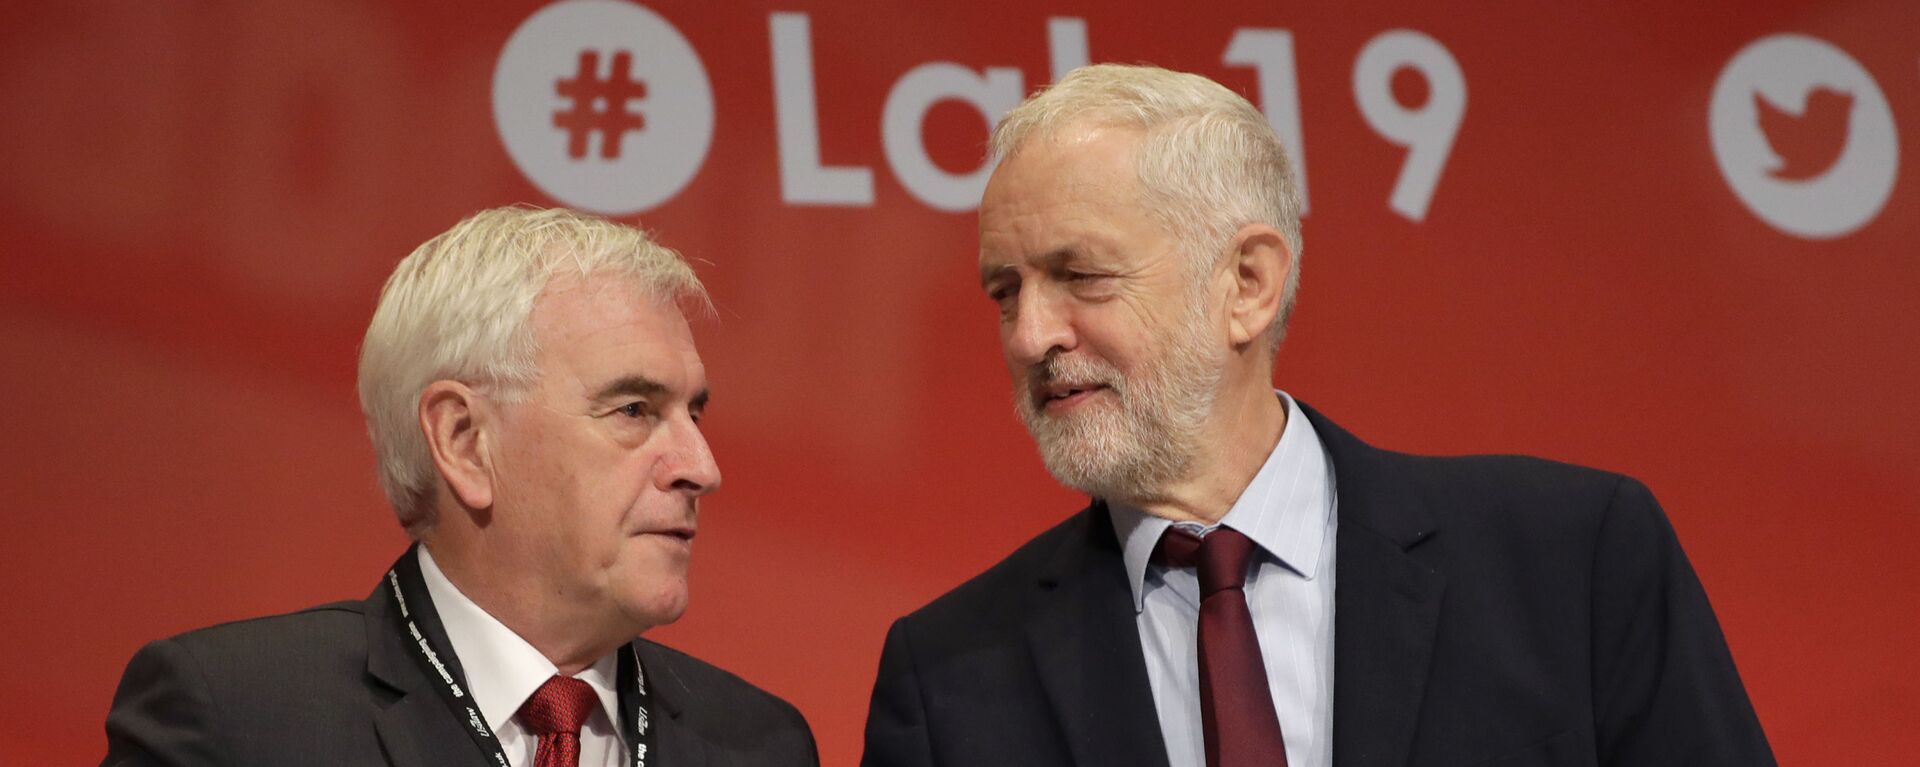 Jeremy Corbyn, leader of Britain's opposition Labour Party, right, and John McDonnell Shadow Chancellor on stage during the Labour Party Conference at the Brighton Centre , Tuesday, Sept. 24, 2019. - Sputnik International, 1920, 02.03.2022